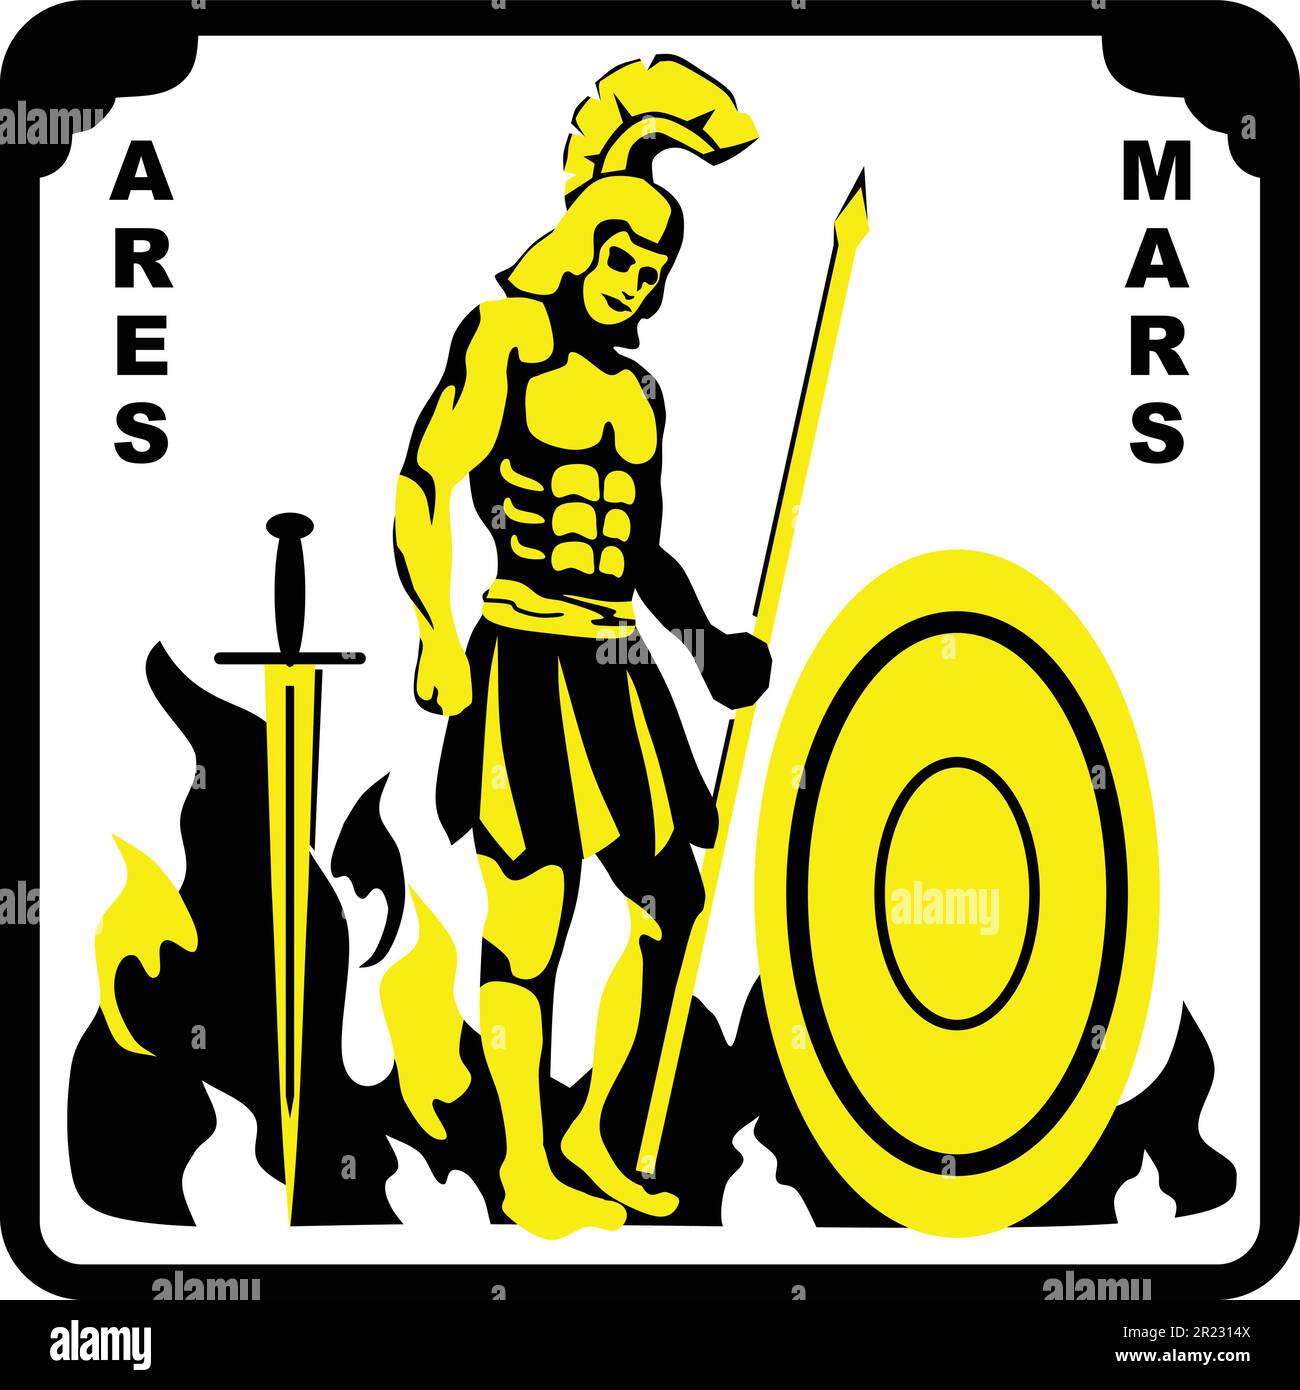 Ares Mars Deity of Greek and Rome Stock Vector